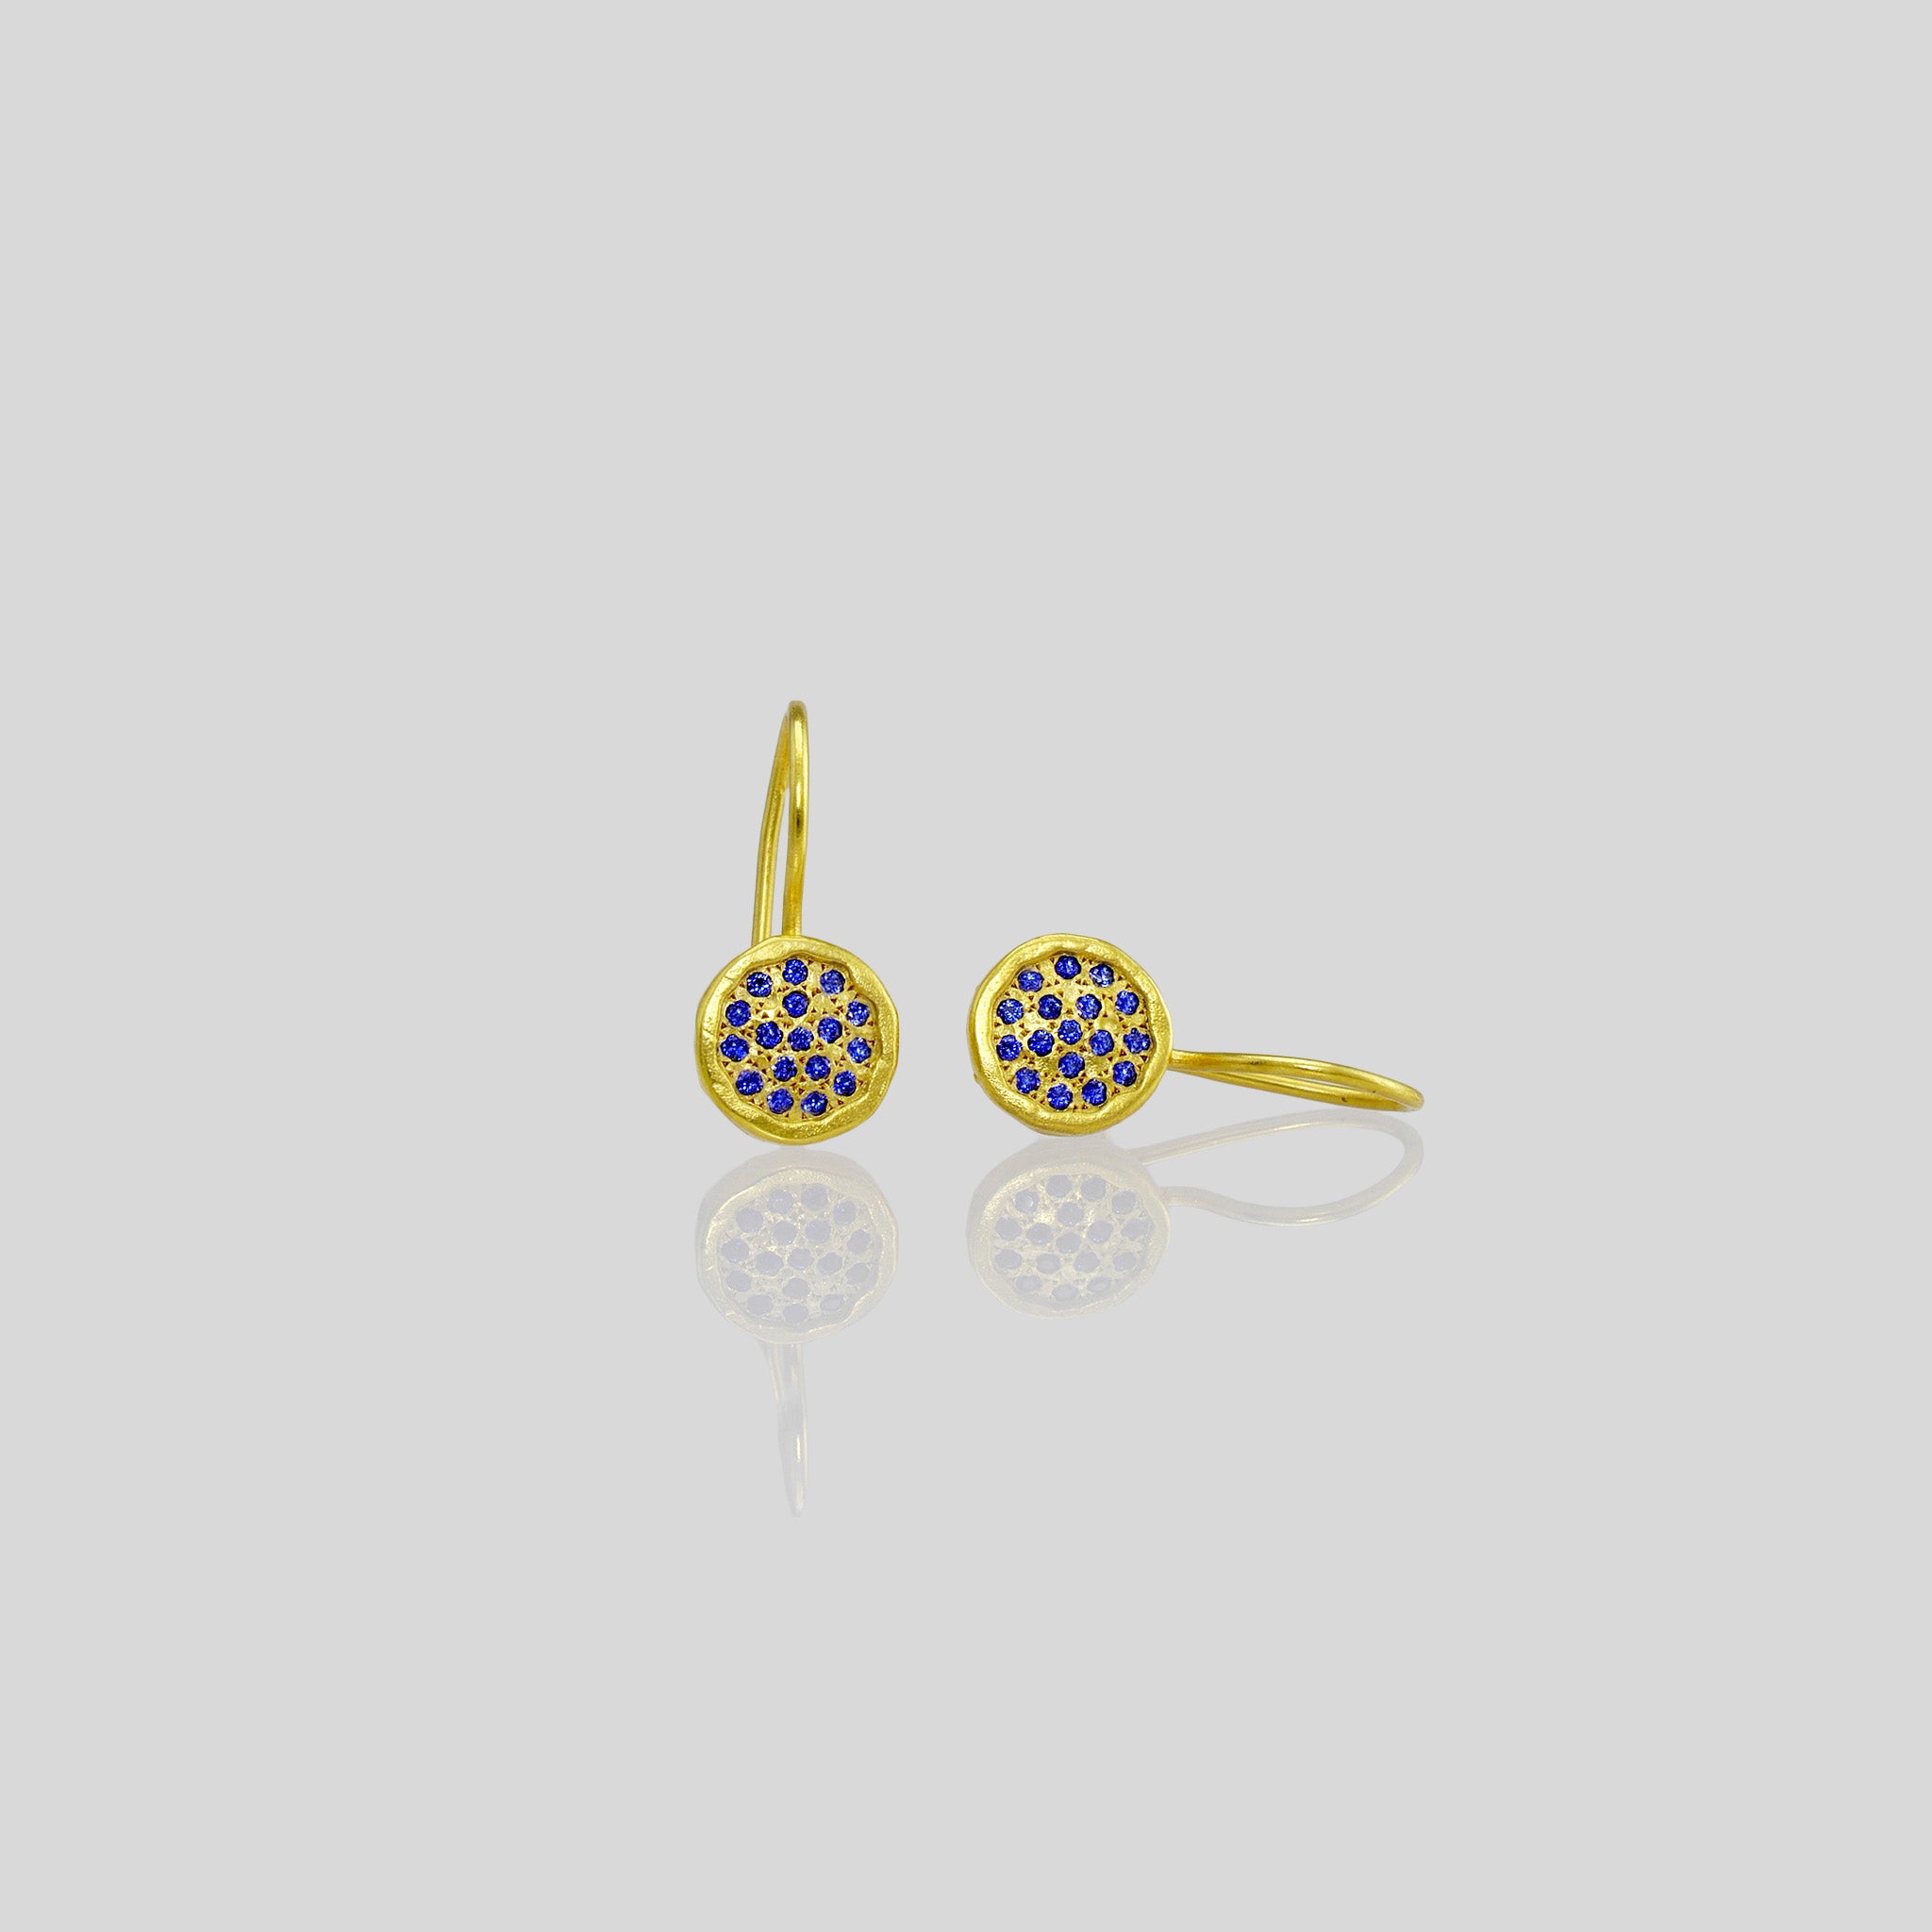 Gold drop earrings adorned with twinkling Sapphires, reminiscent of a starry night sky.